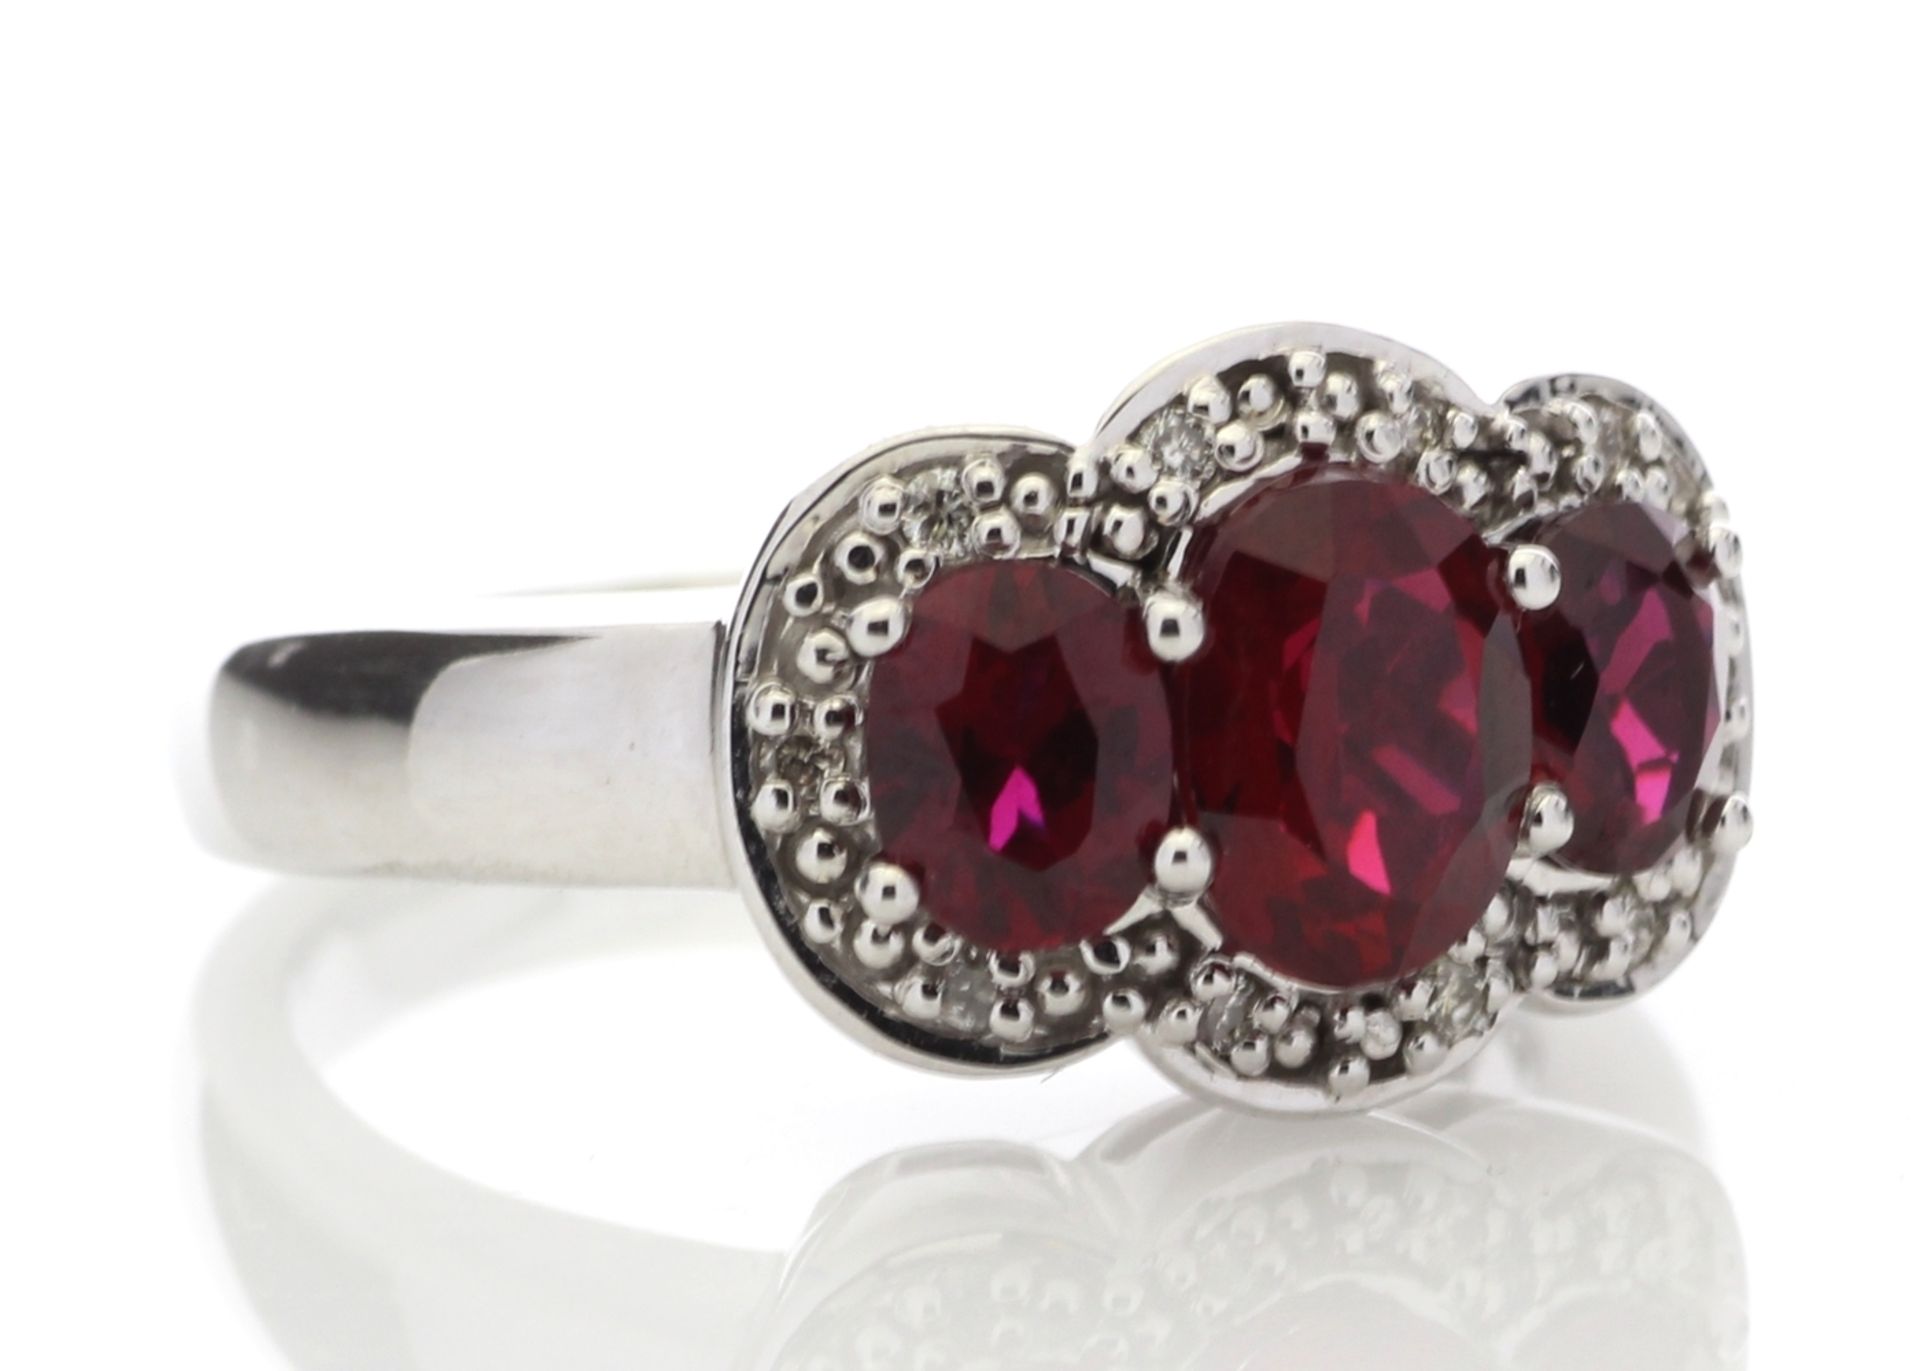 9ct White Gold Created Ruby Diamond Cluster Ring 0.08 Carats - Valued by AGI £955.00 - 9ct White - Image 4 of 4